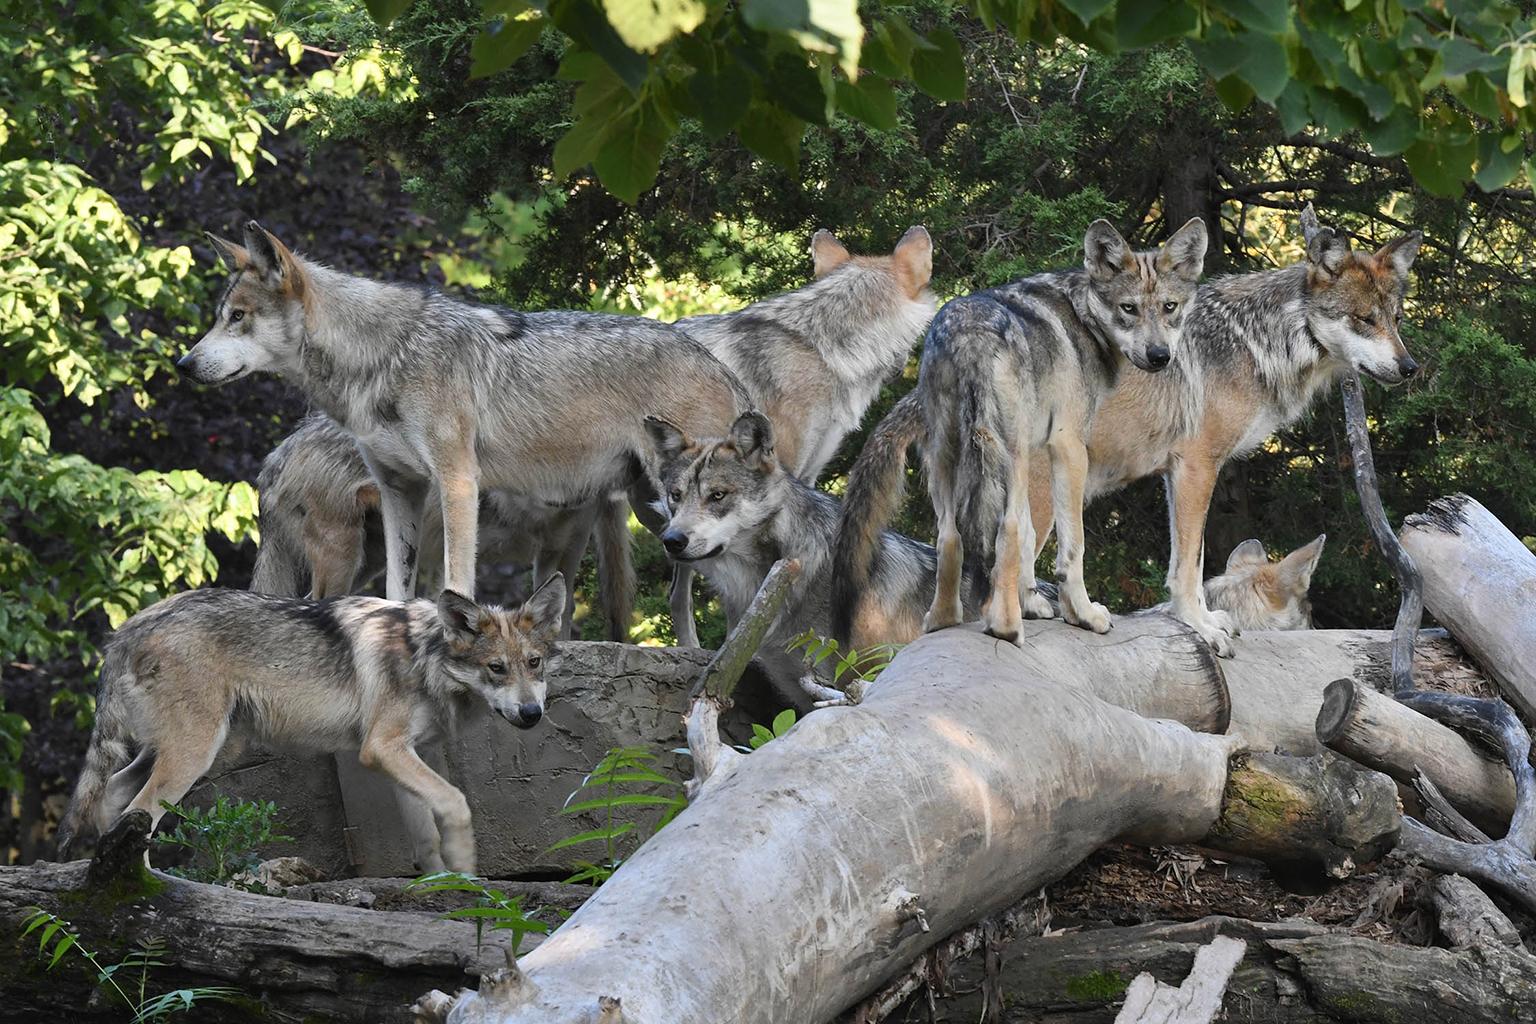 Nine of the 10 Mexican wolves currently at Brookfield Zoo will be leaving this month based on recommendations from the Association of Zoos and Aquariums’ Species Survival Plan and the U.S. Fish and Wildlife Service’s Mexican Wolf Recovery Program. (Jim Schulz / Chicago Zoological Society)